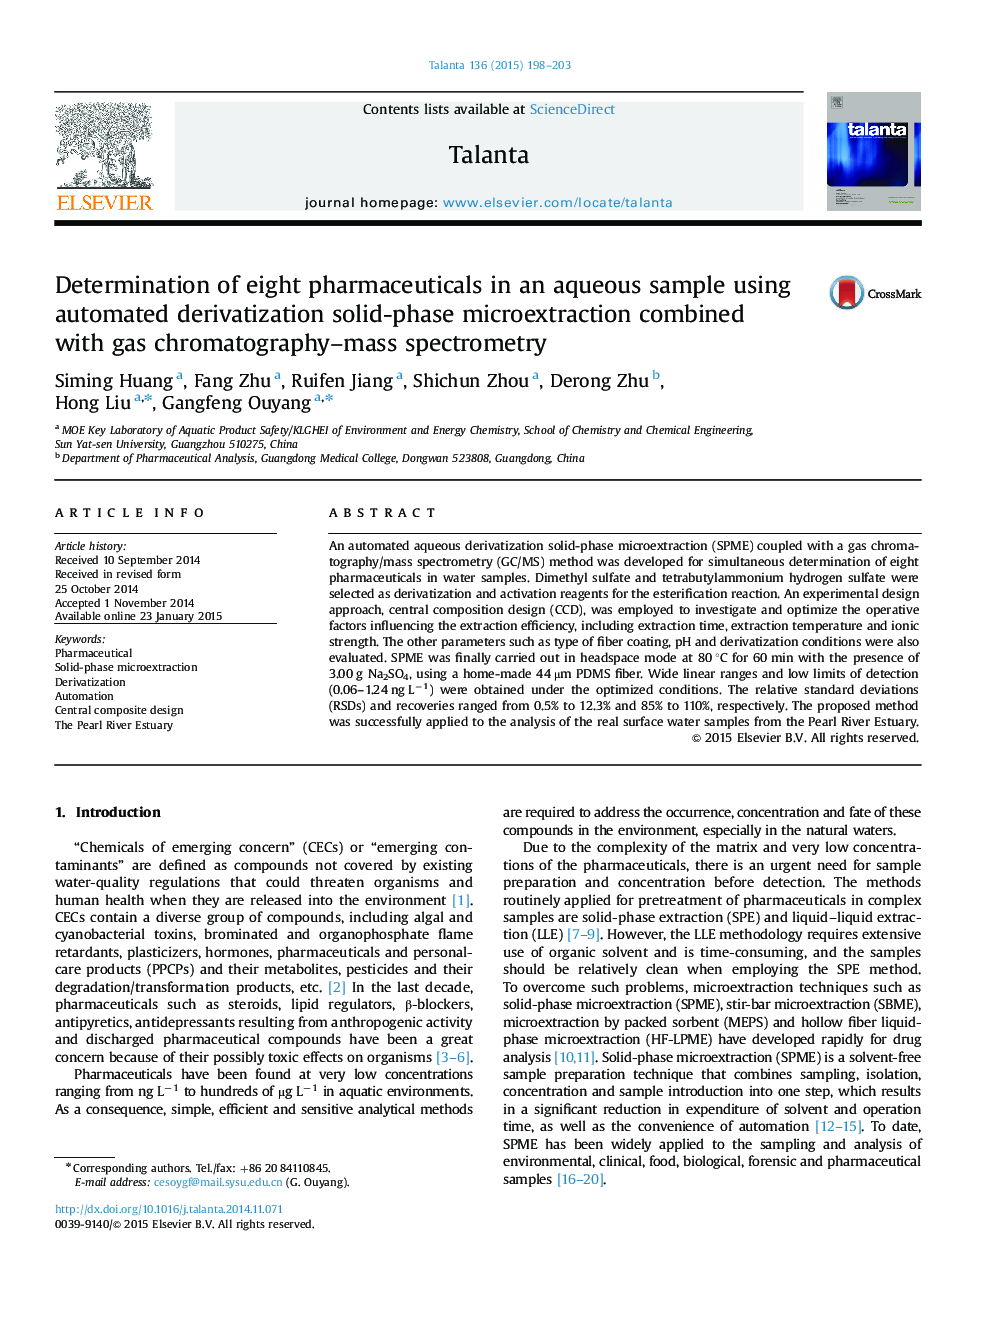 Determination of eight pharmaceuticals in an aqueous sample using automated derivatization solid-phase microextraction combined with gas chromatography–mass spectrometry